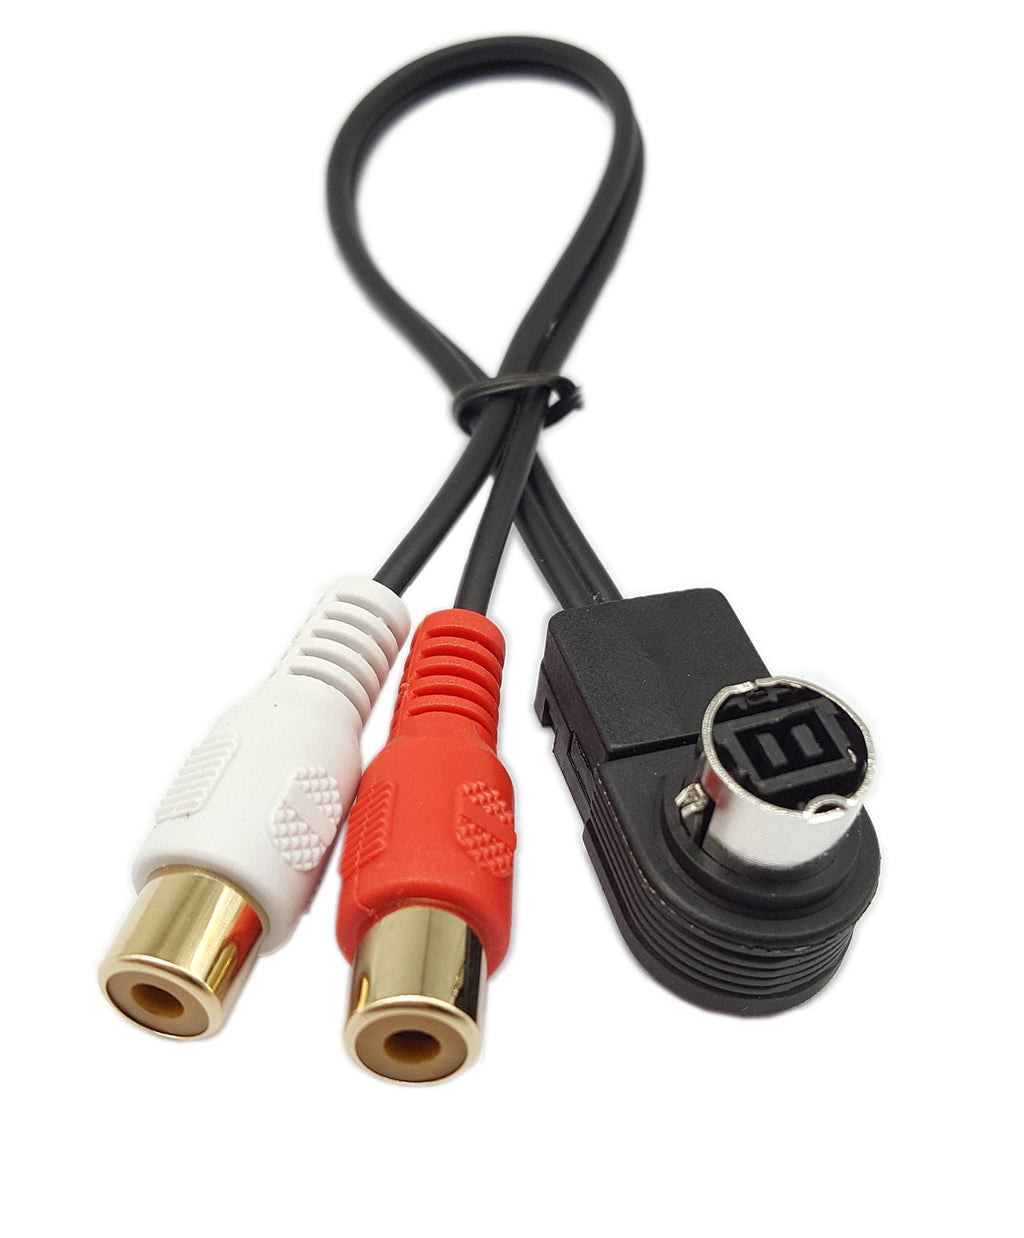 Alpine Ai-net RCA Aux Cable,SinLoon Ai-net to 2RCA Female Auxiliary Input Adapter Cable for Alpine KCA-121B DVD JVC Sound Input Cable Ai-net RCA Aux Cable